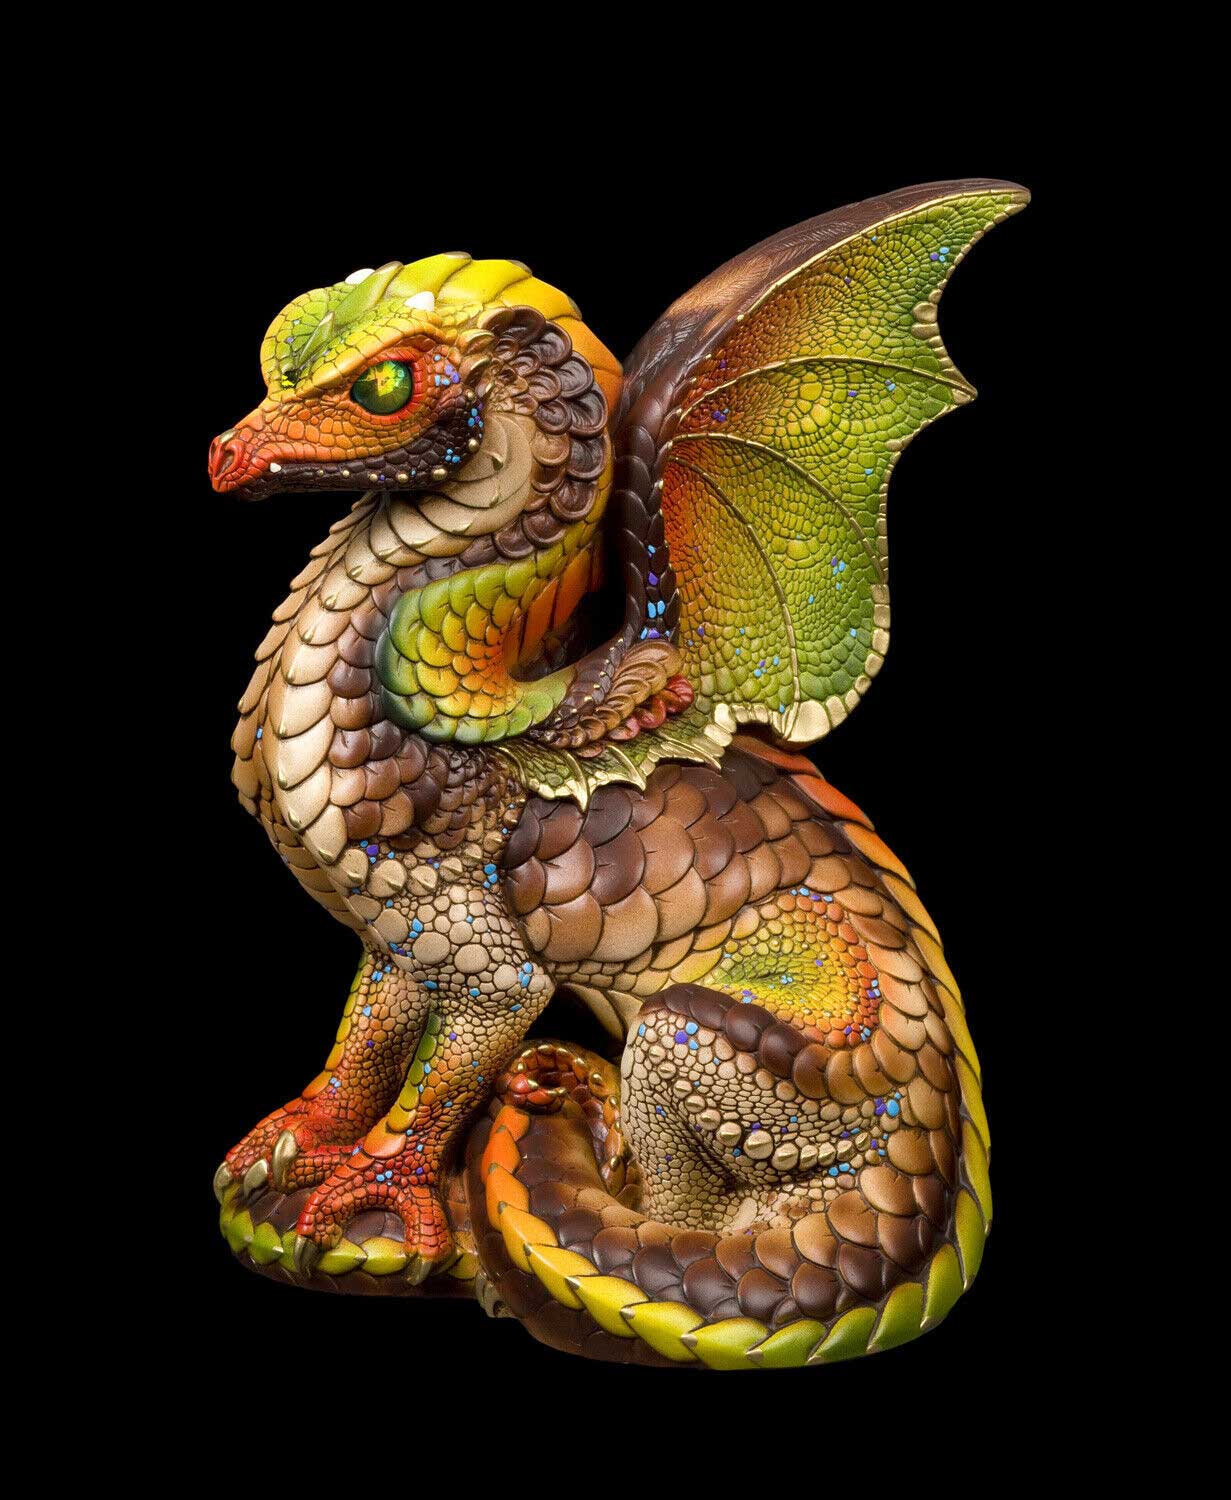 20221117-Autumn-Harvest-Spectral-Dragon-Test-Paint-1-by-Gina